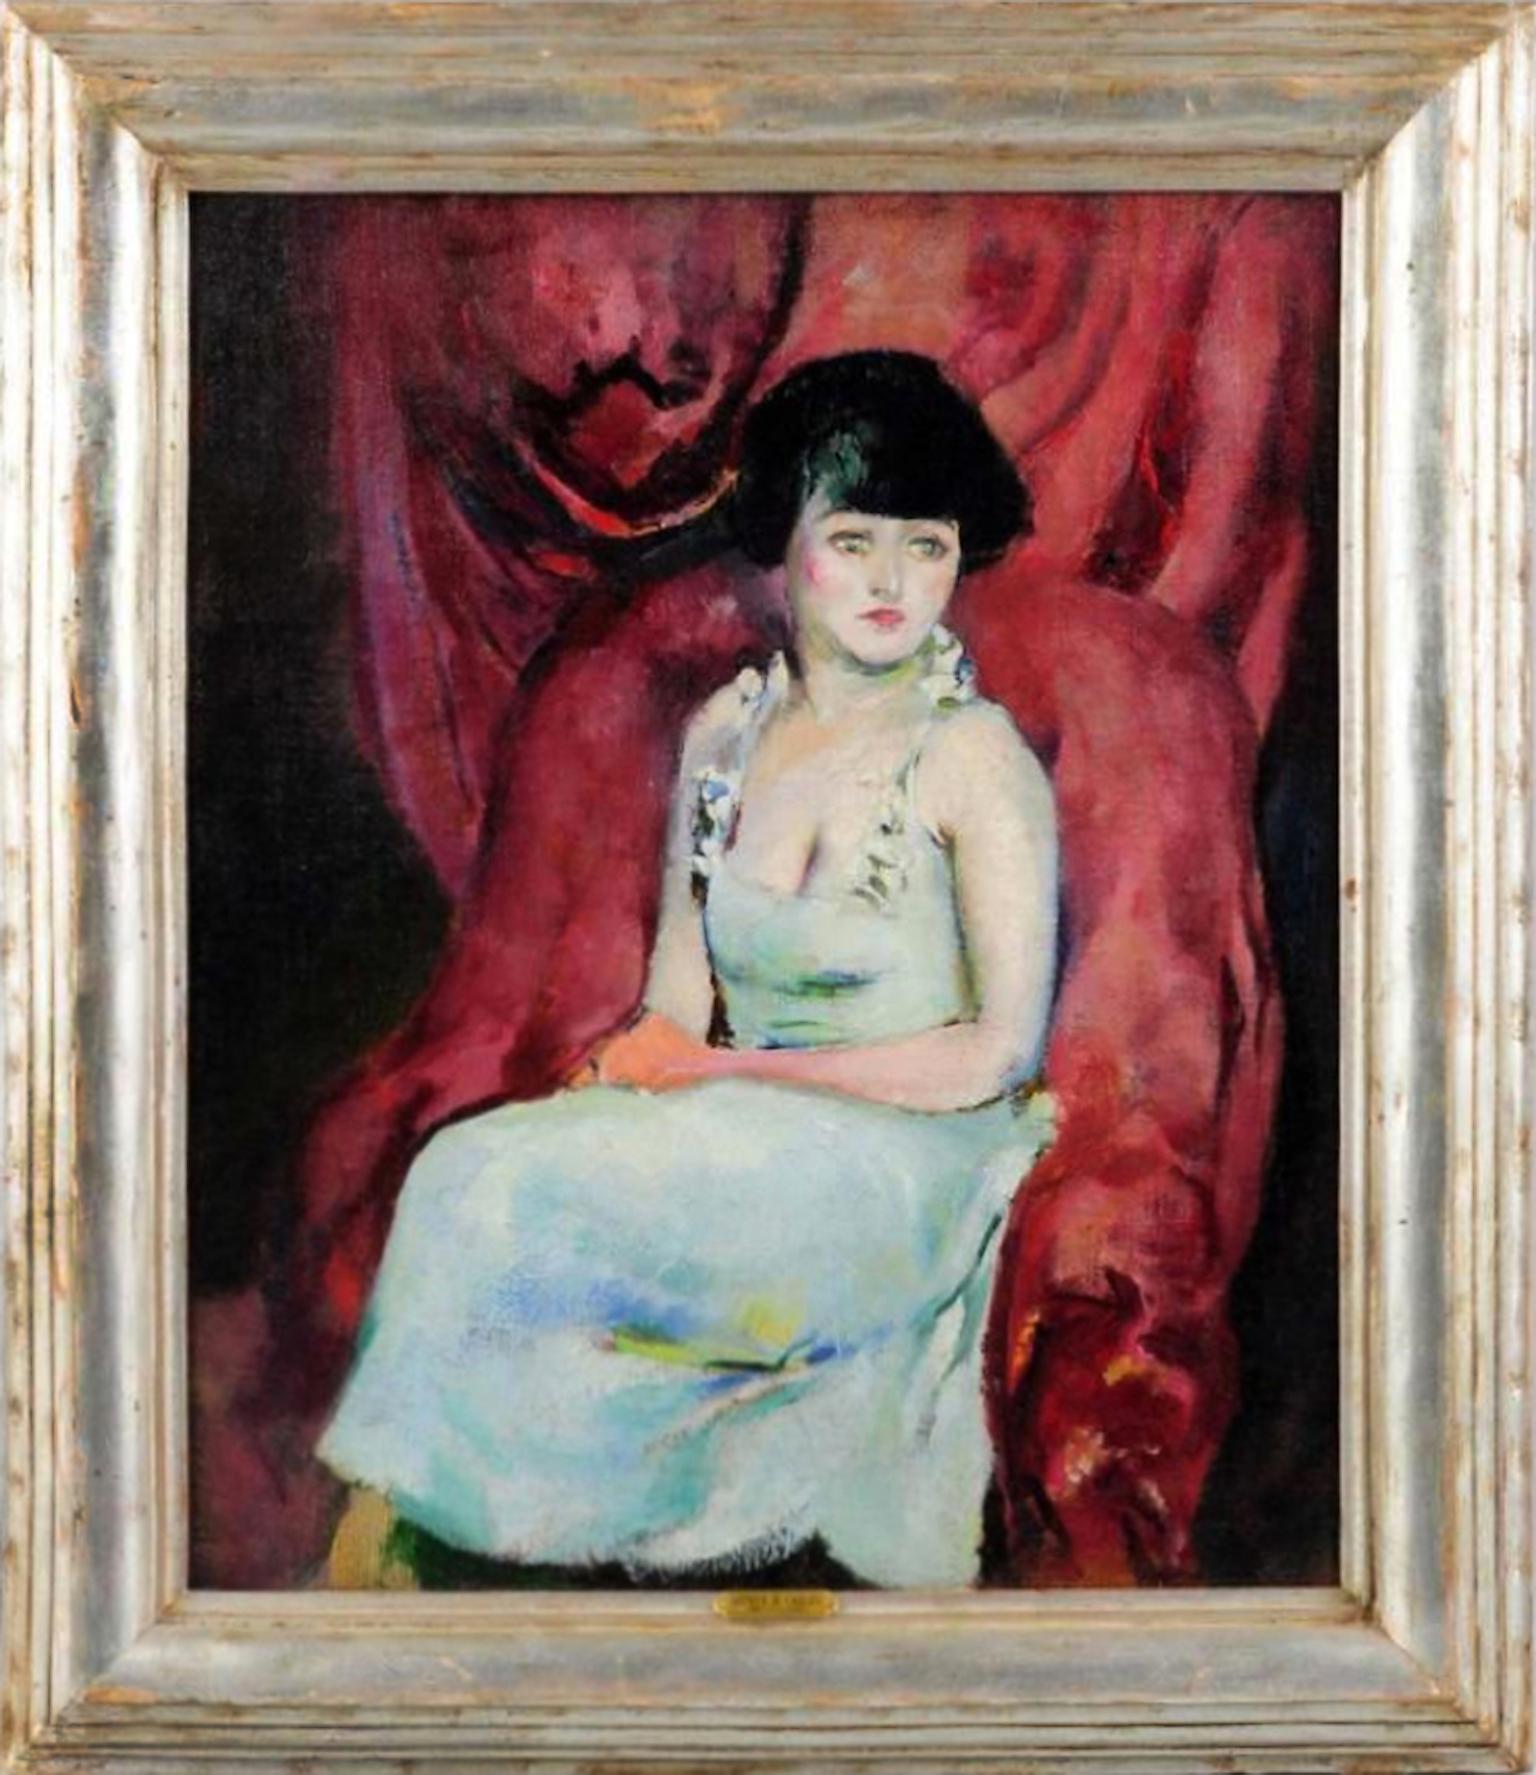 Portrait of a Charming Seated Woman Against Maroon Drapes - Painting by Arthur Beecher Carles